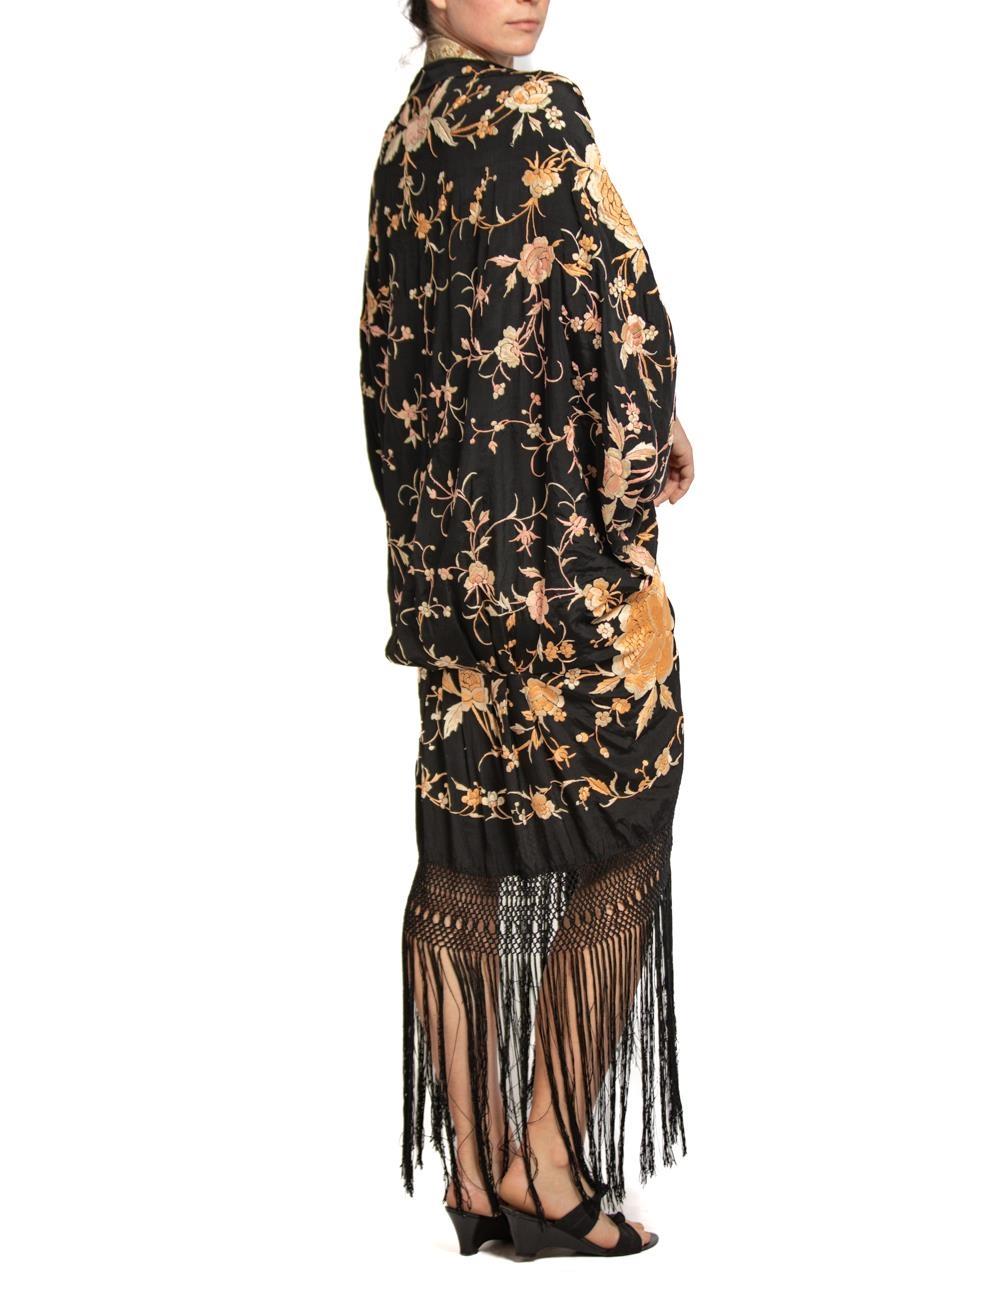 MORPHEW COLLECTION Black & Champagne Silk Floral Hand Embroidered Piano Shawl   For Sale 4